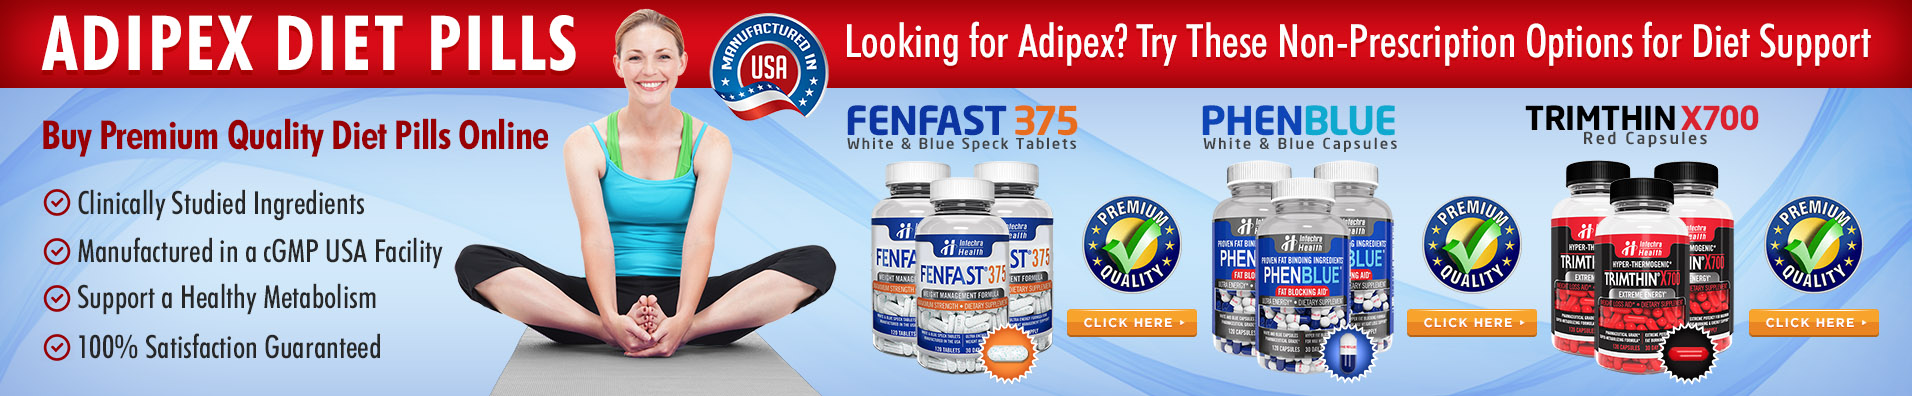 What You Should Know Before You Buy Adipex Online Prescription Diet